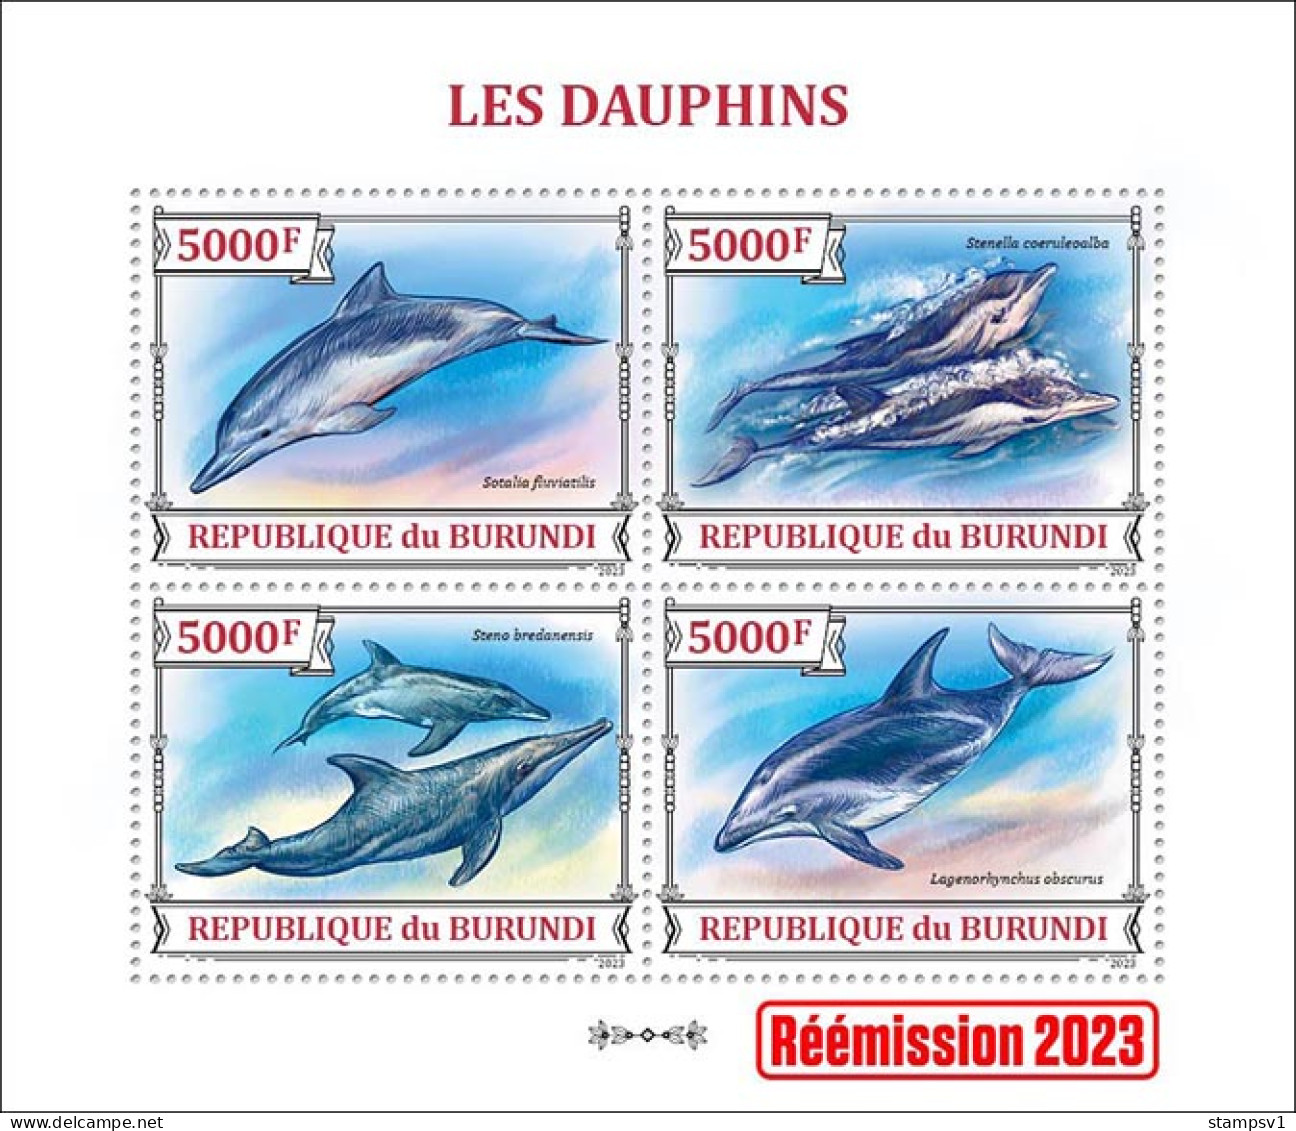 Burundi 2023 Dolphins. (218) OFFICIAL ISSUE - Dauphins